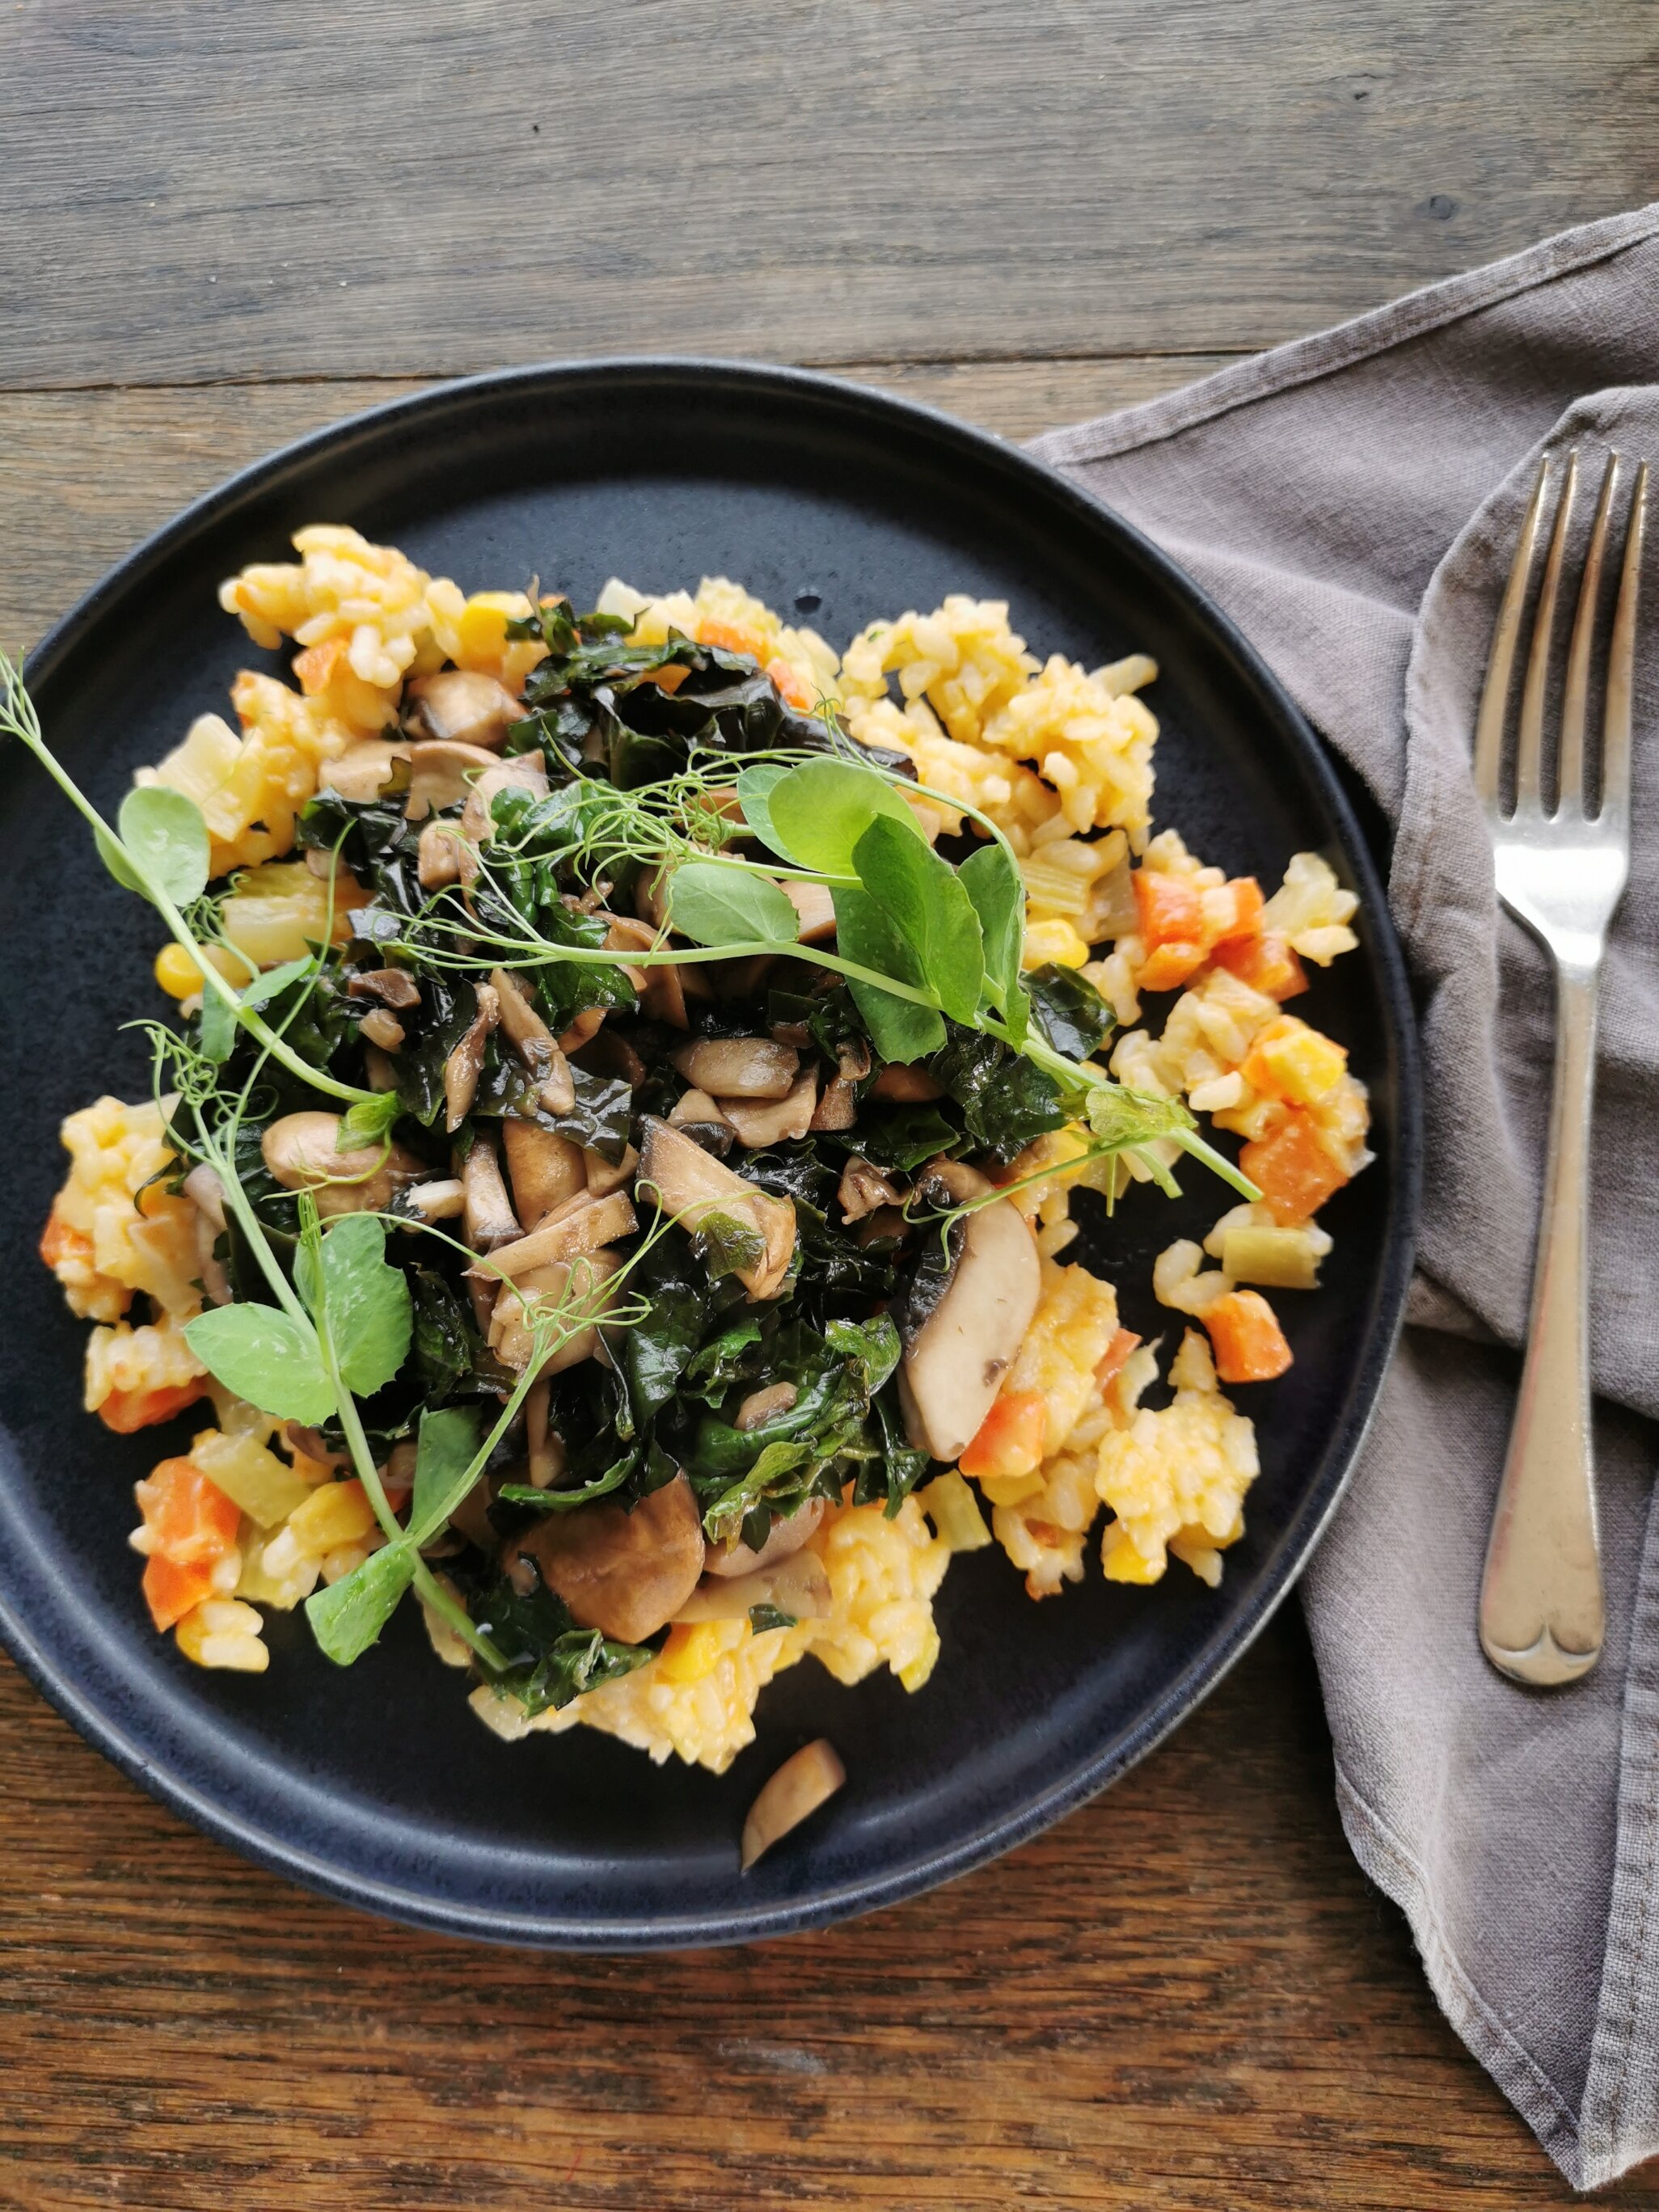 Risotto with kale and mushrooms